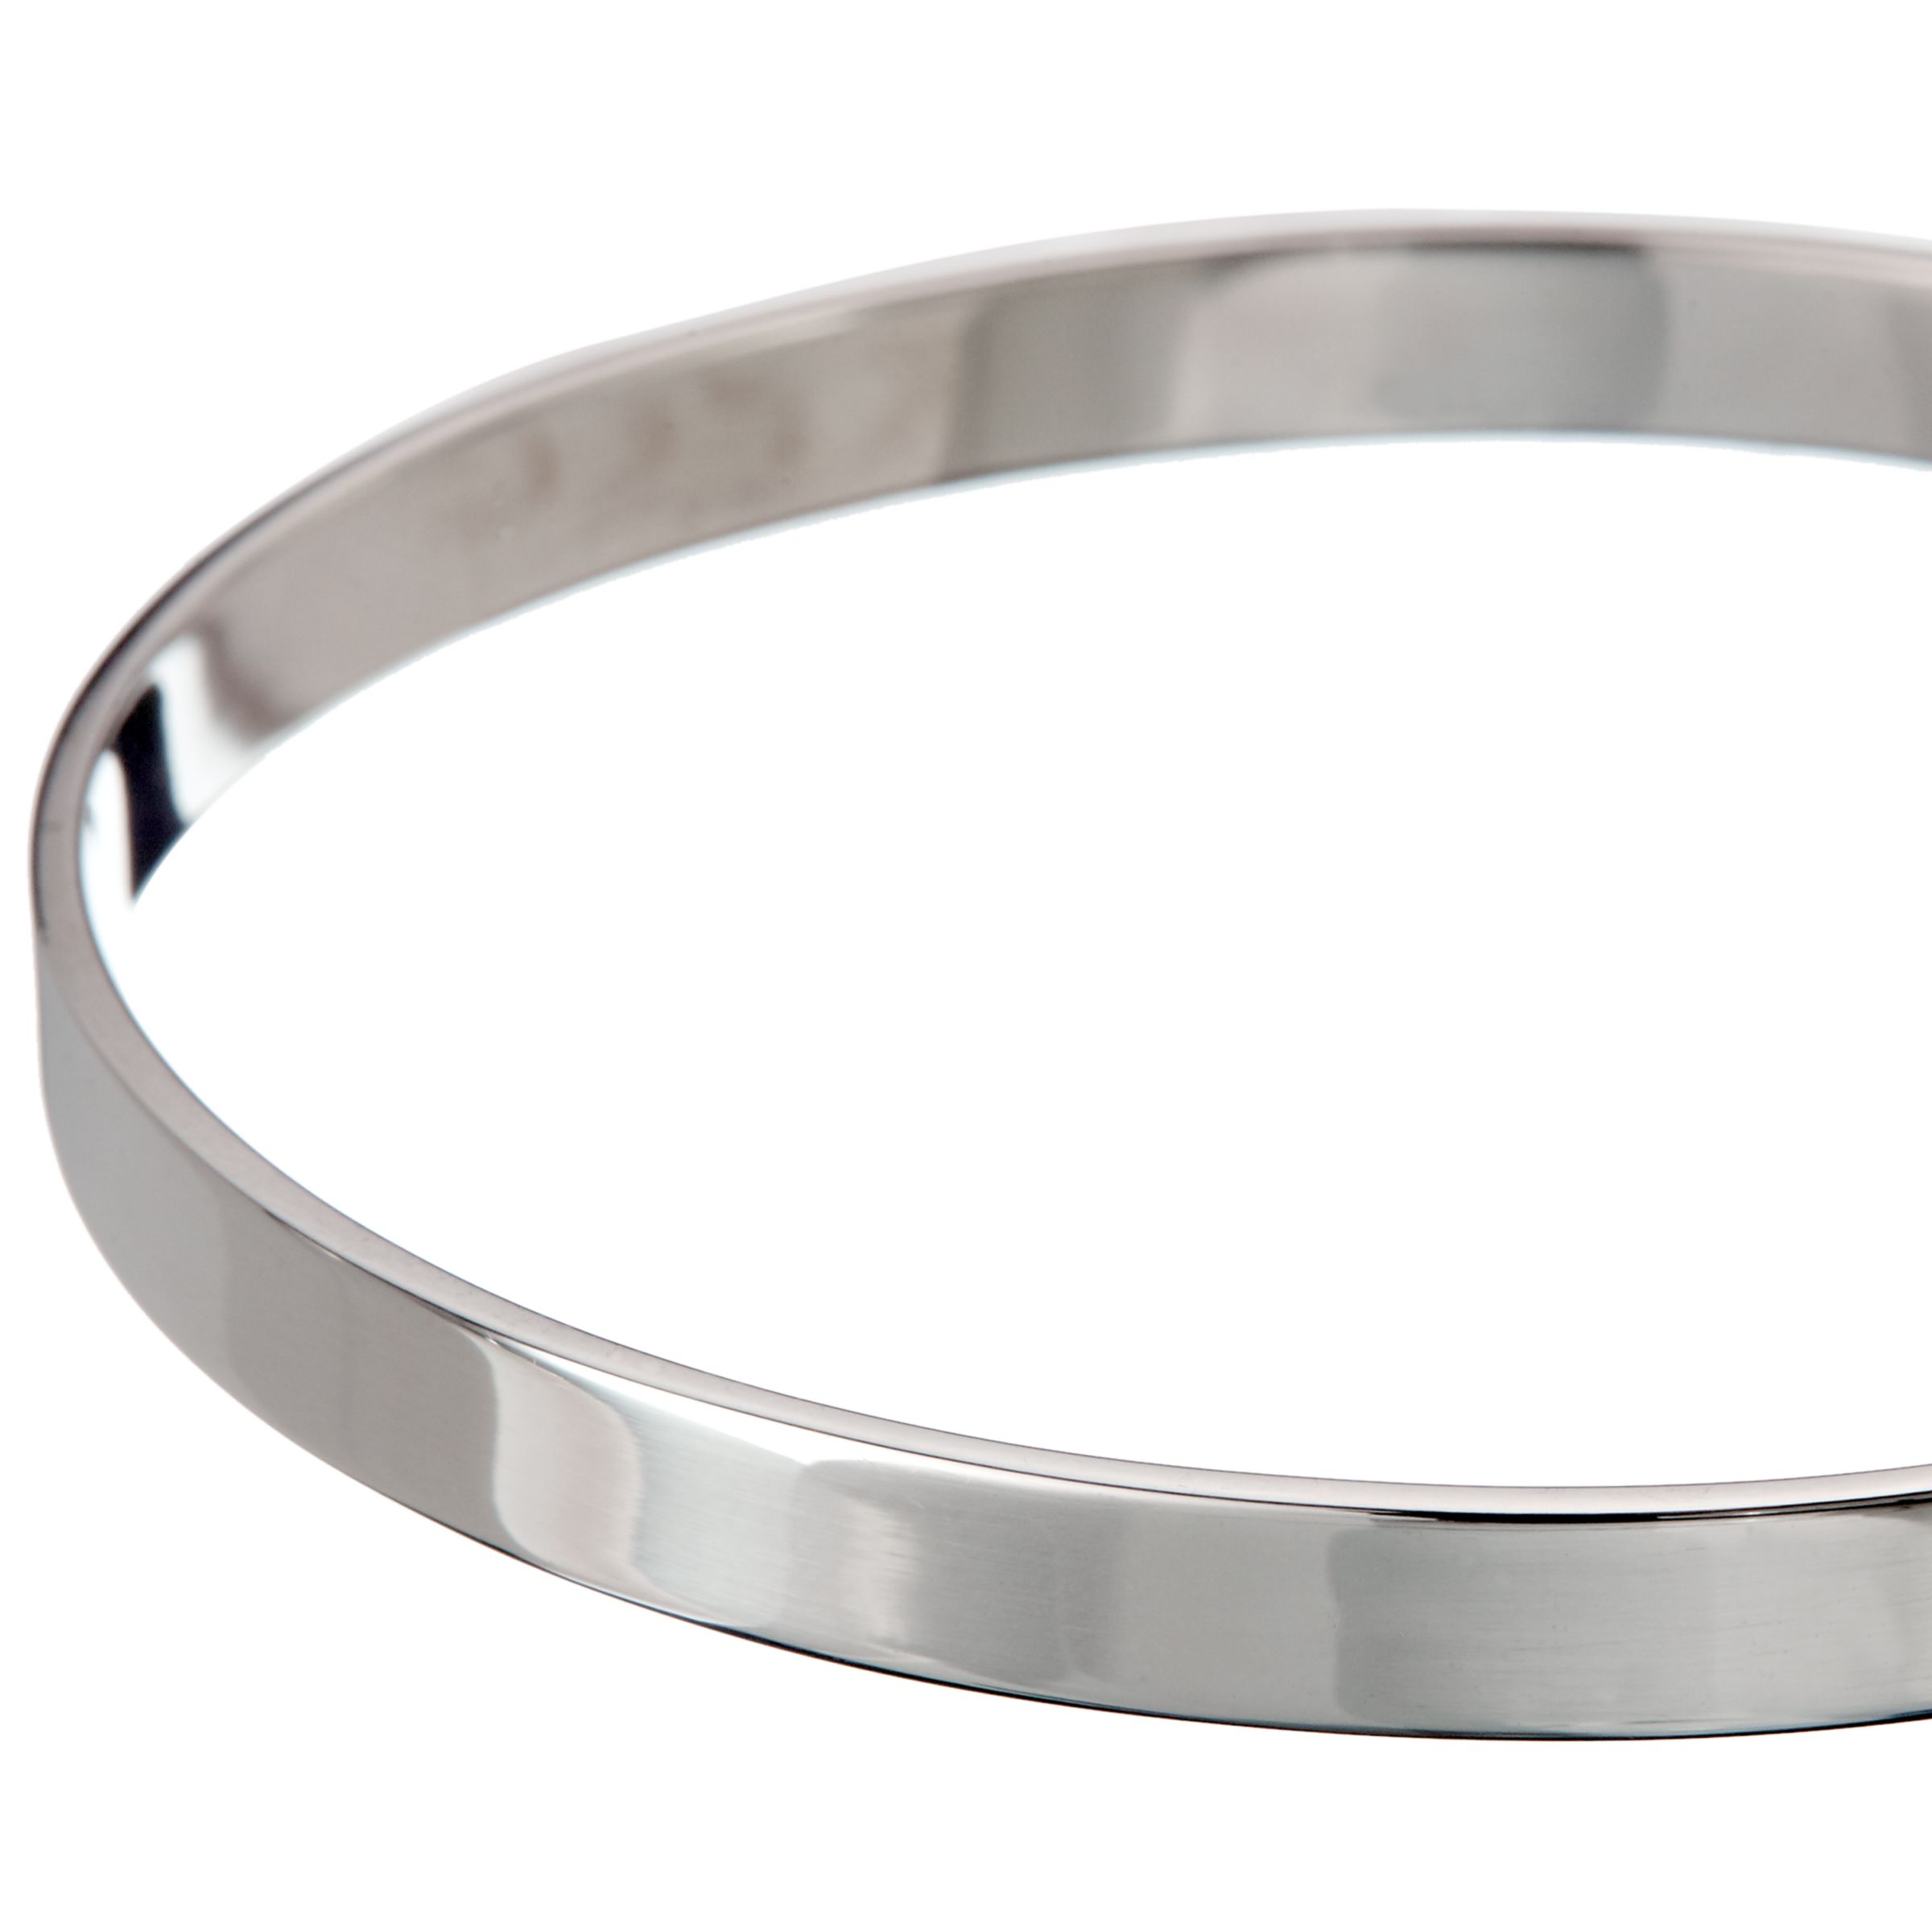 Buy Andea Sterling Silver Square Edge Bangle, Silver Online at johnlewis.com